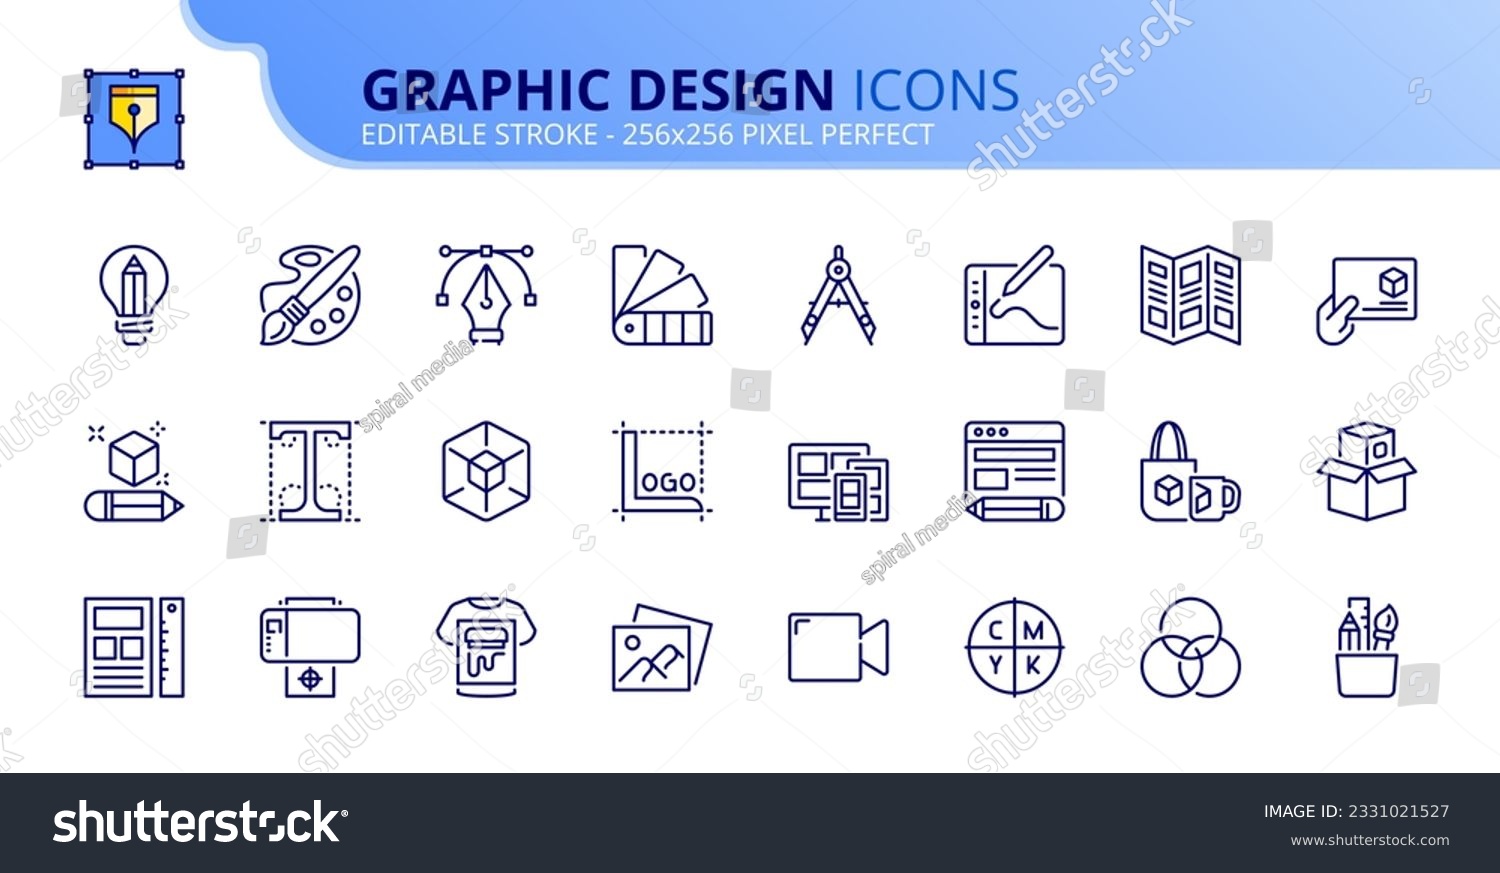 Line icons about graphic design. Contains such icons as vector, illustation, web design, and print. Editable stroke Vector 256x256 pixel perfect #2331021527